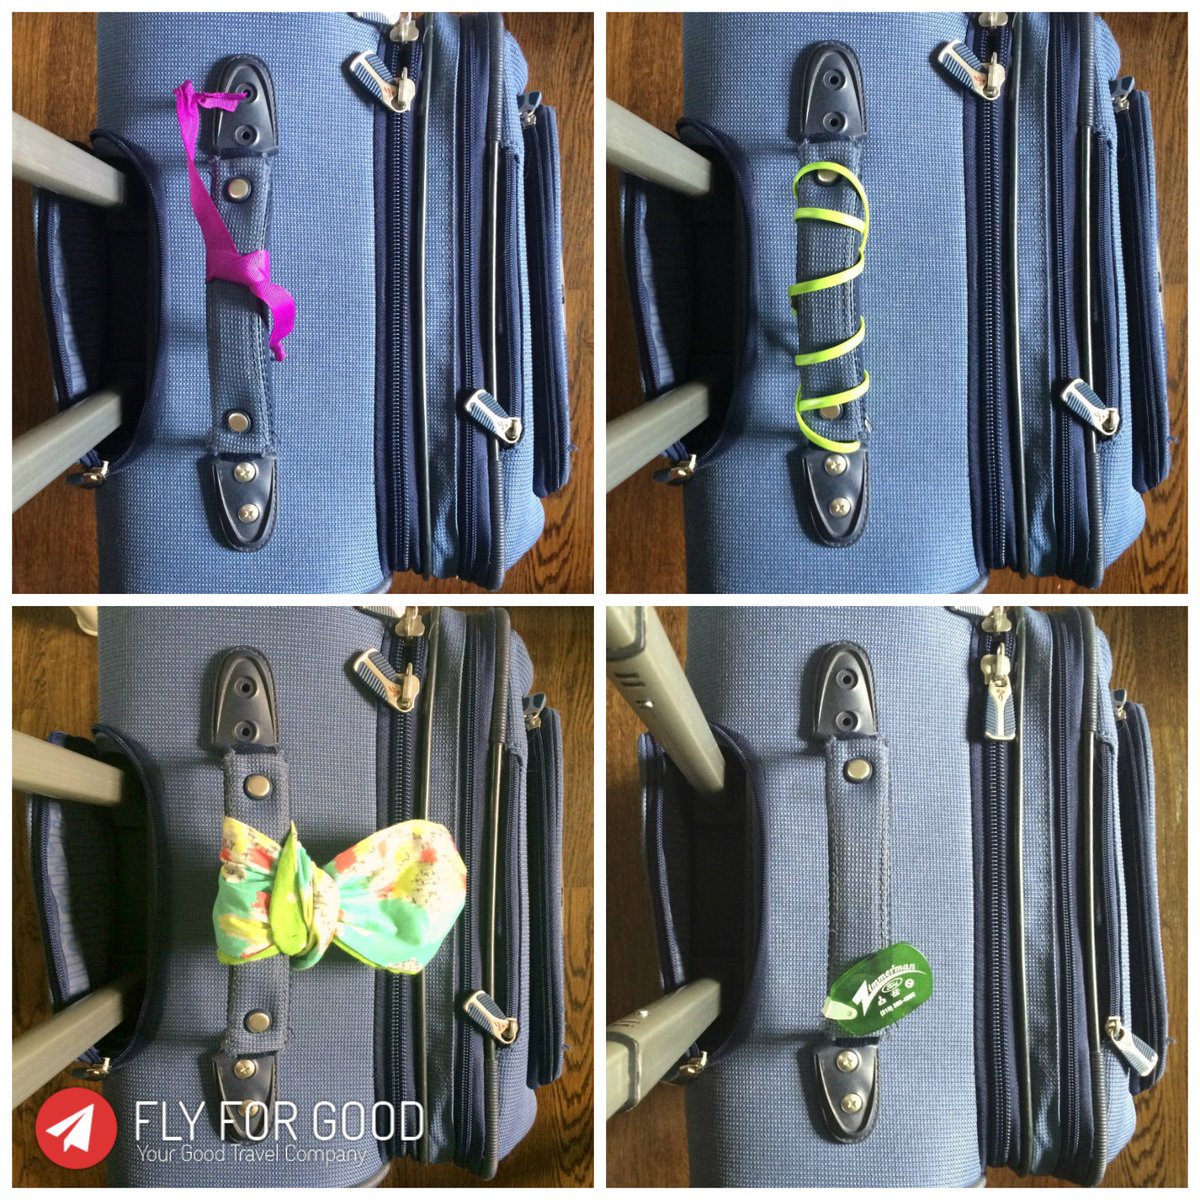 10 Clever ways to make your luggage stand out in a crowd – SheKnows